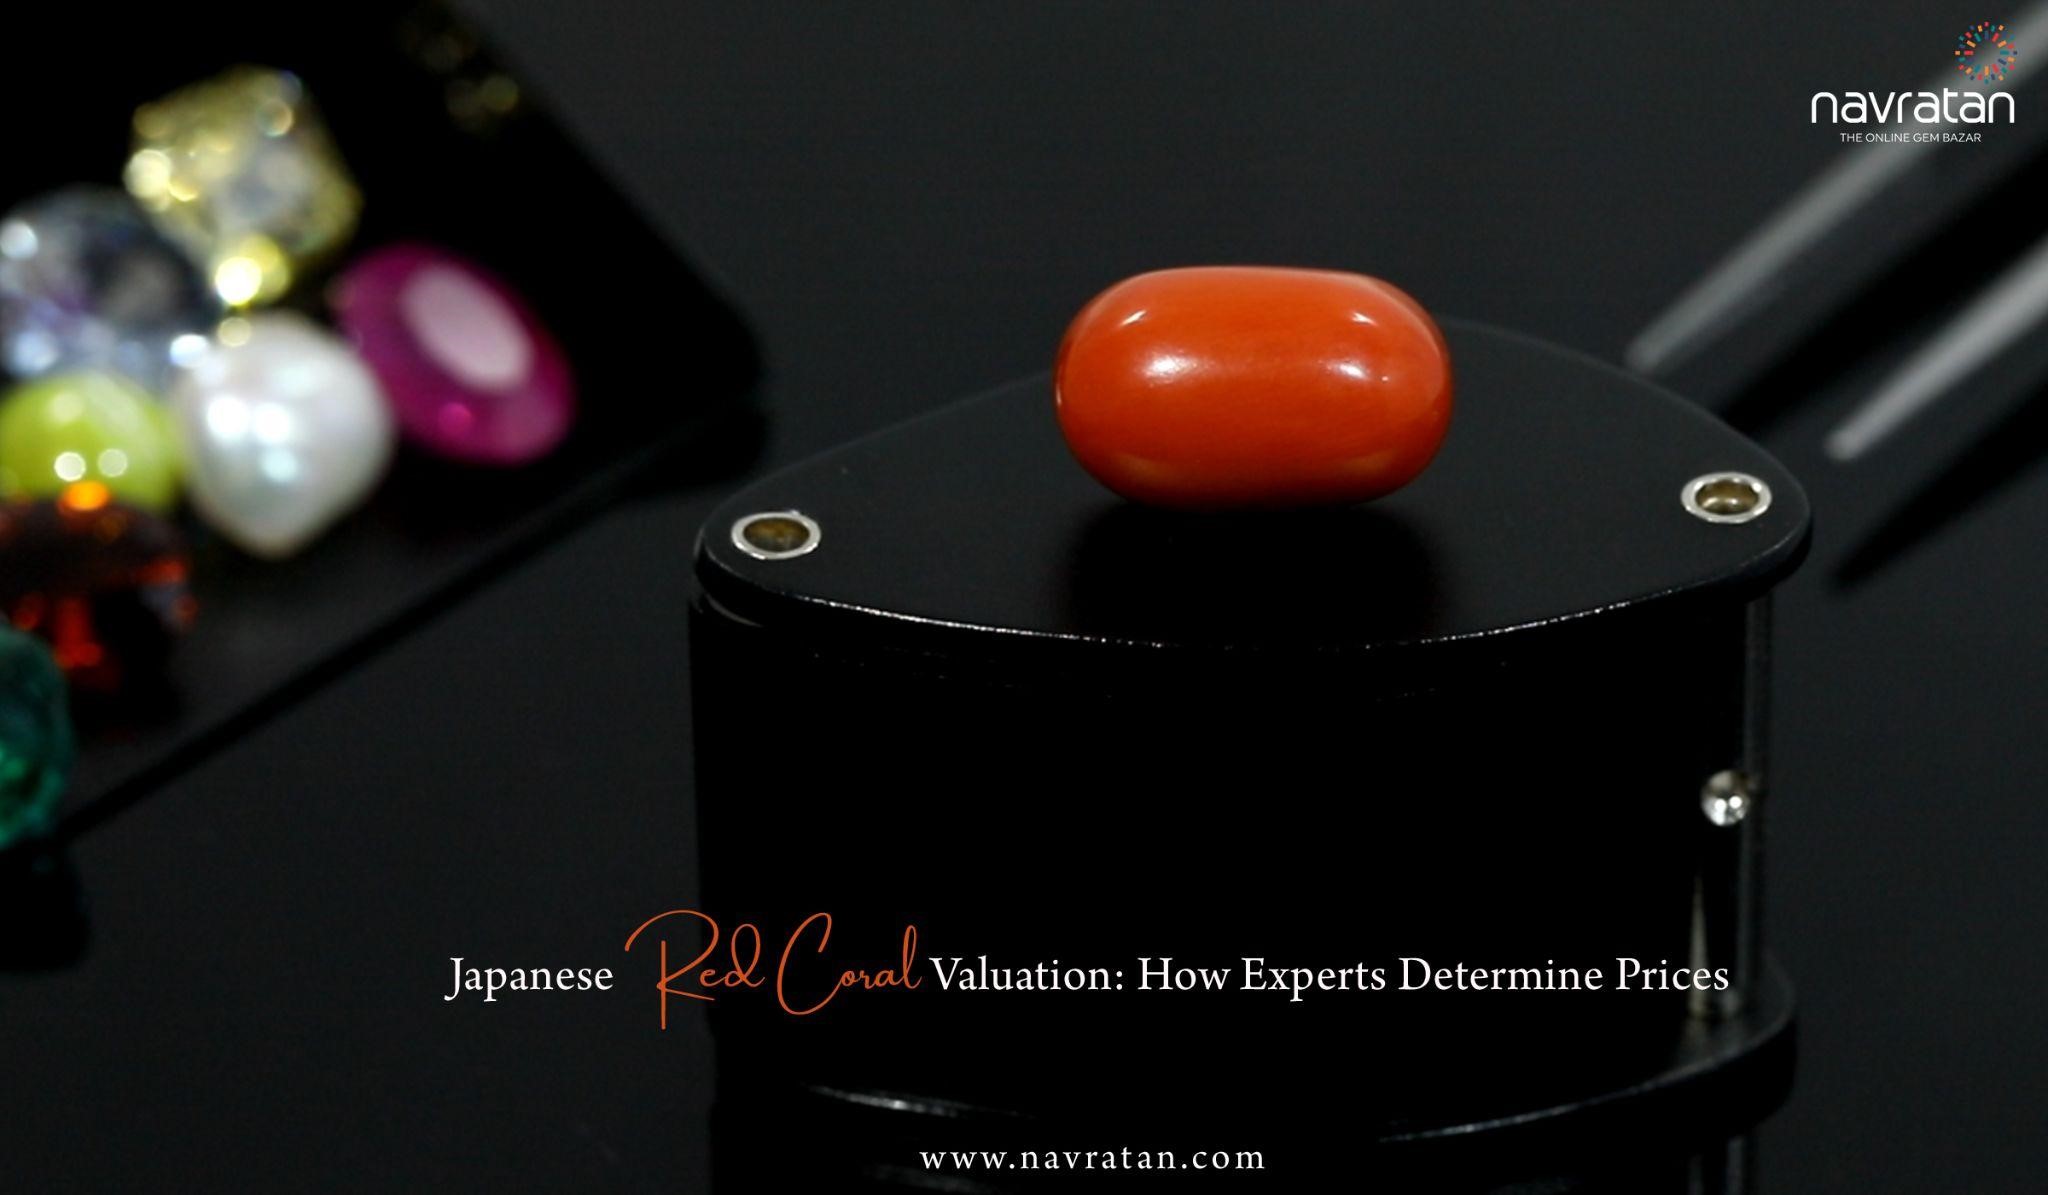 Japanese Red Coral stone